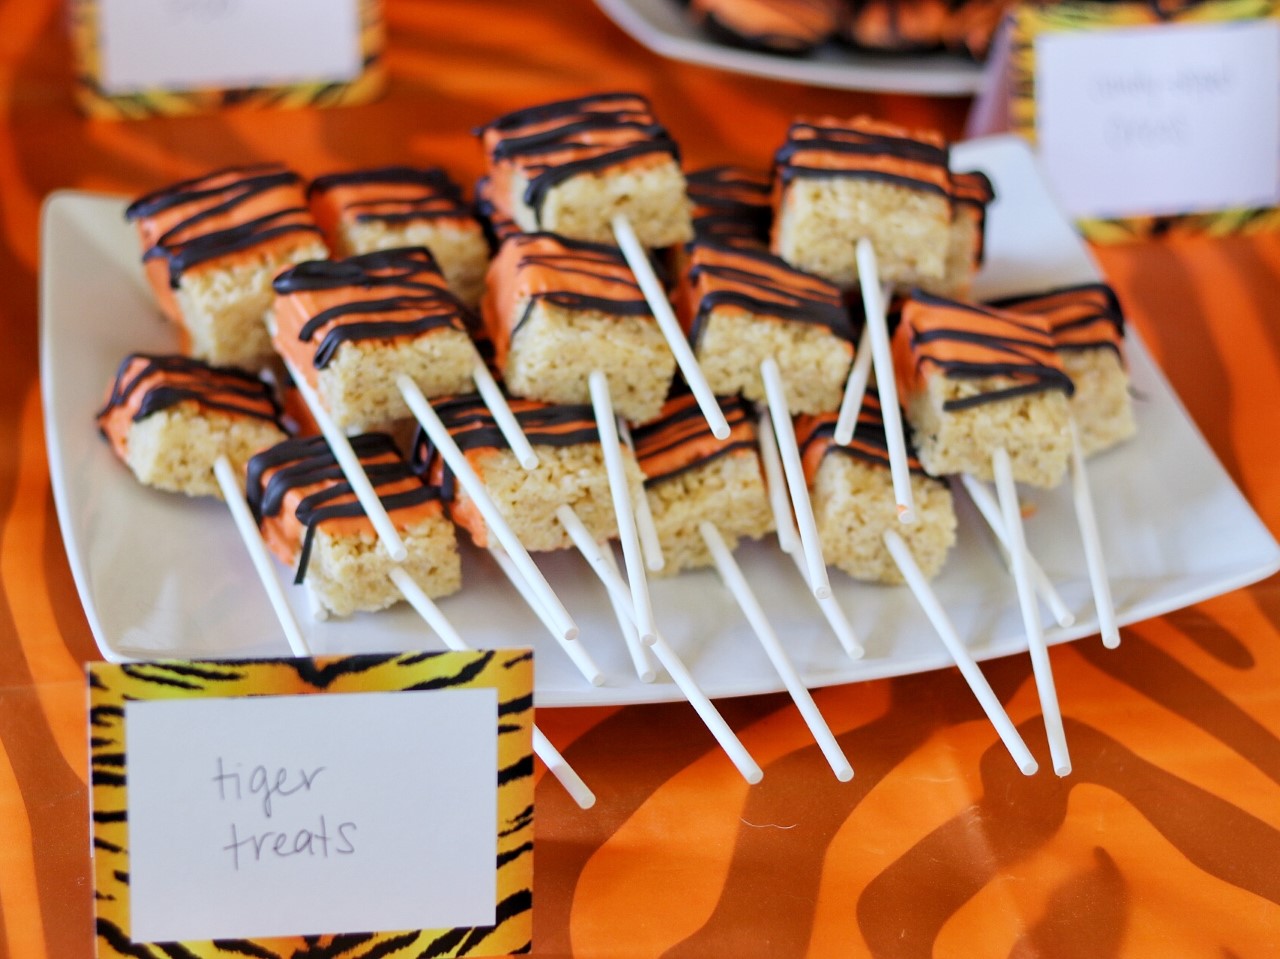 Tiger Treats - rice krispie treats dipped in orange candy melts with black stripes